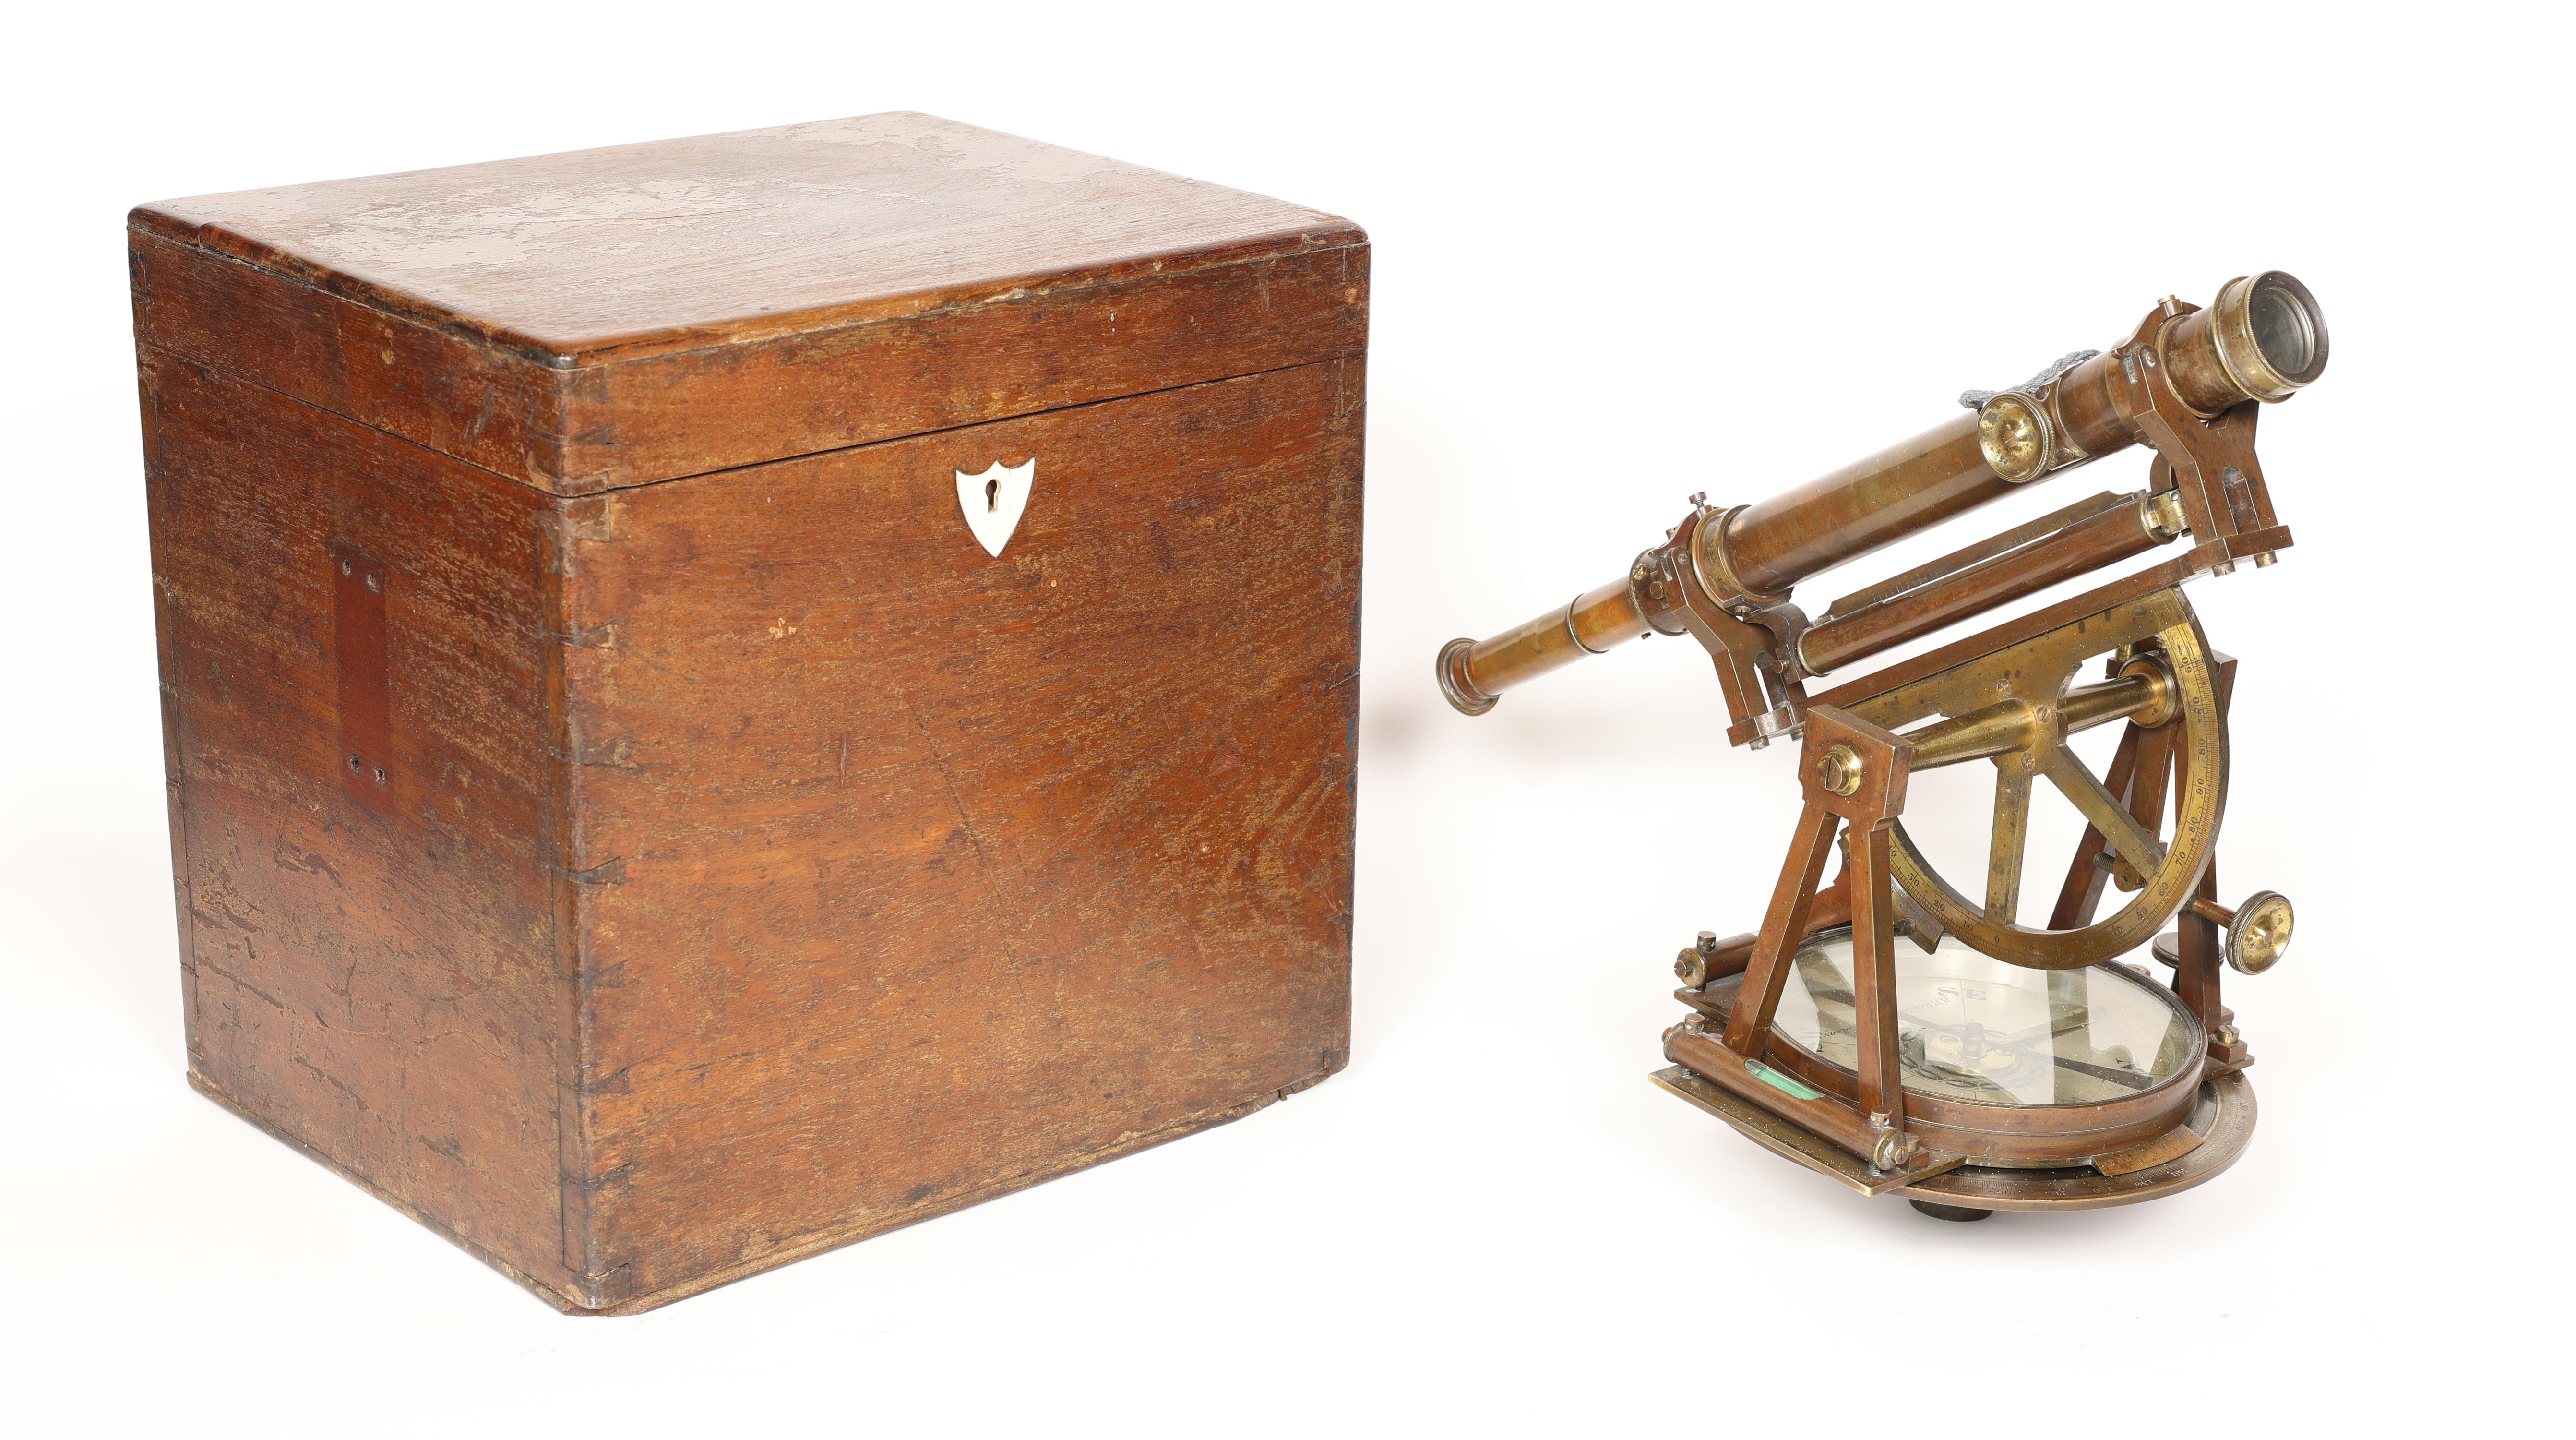 Wonderful Benjamin Pike & Sons (New York) Circa 1850 Theodolite In Good Condition For Sale In Placerville, CA